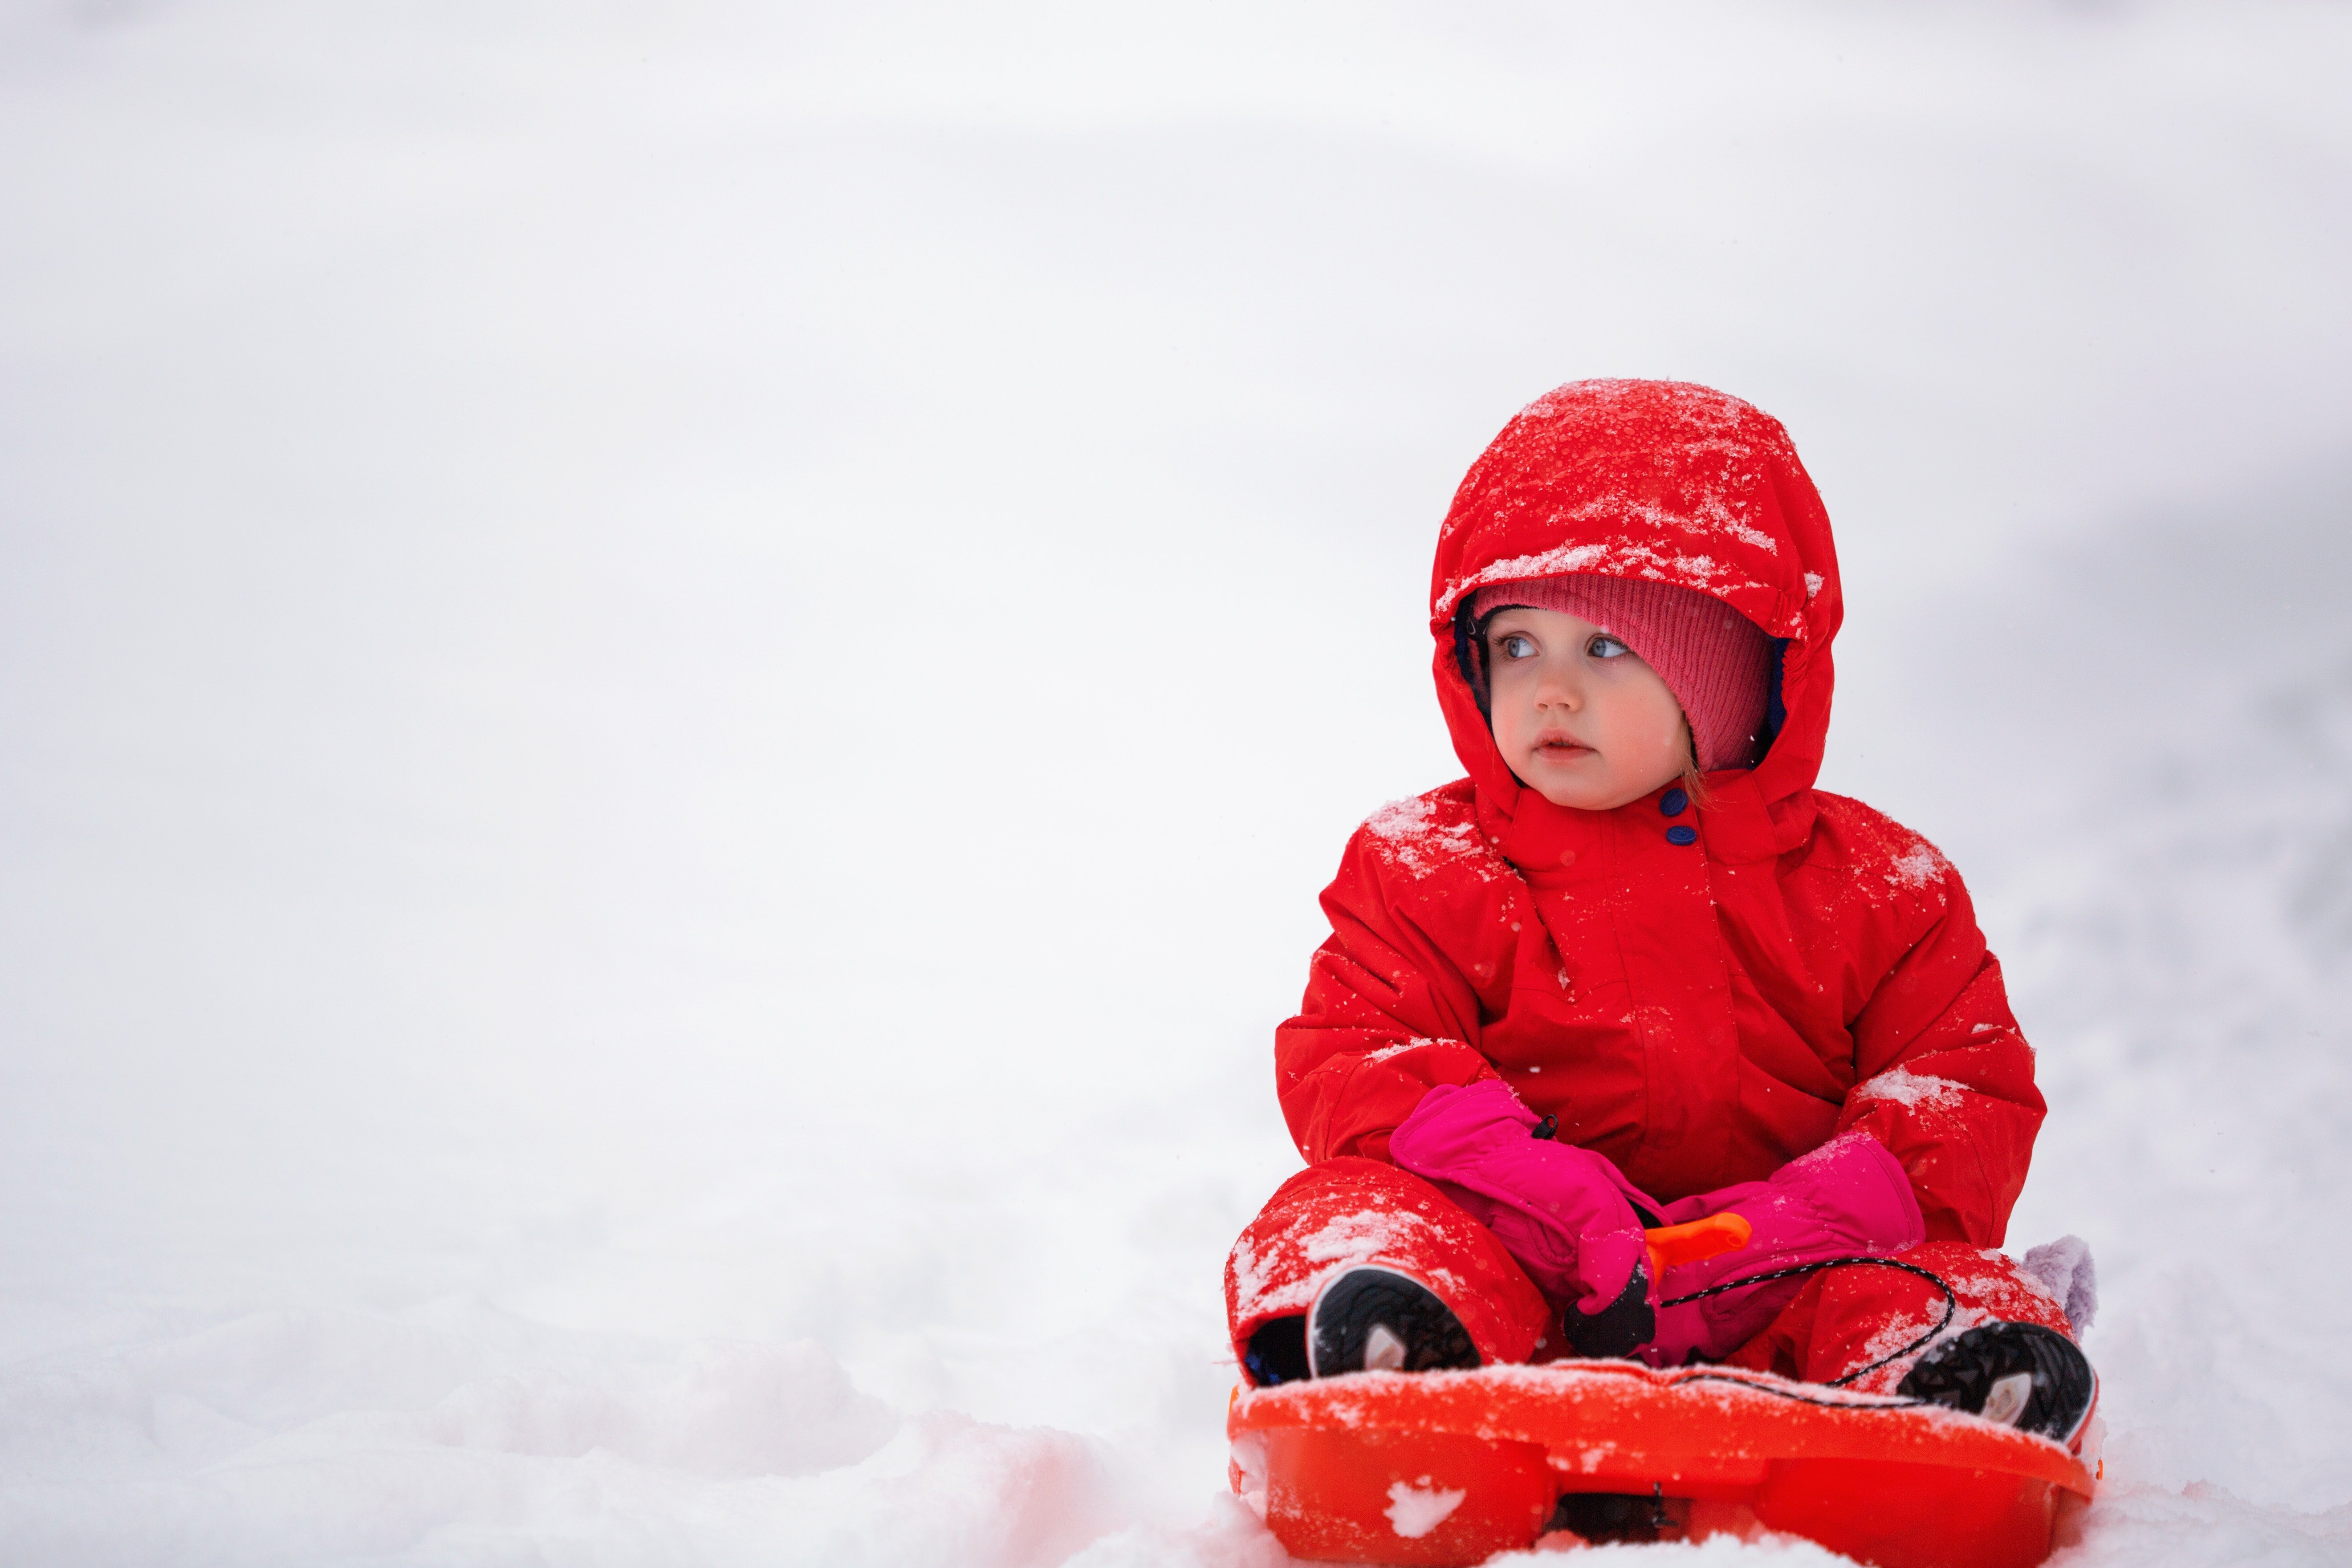 A picture of a baby in snow. | Source: Pexels